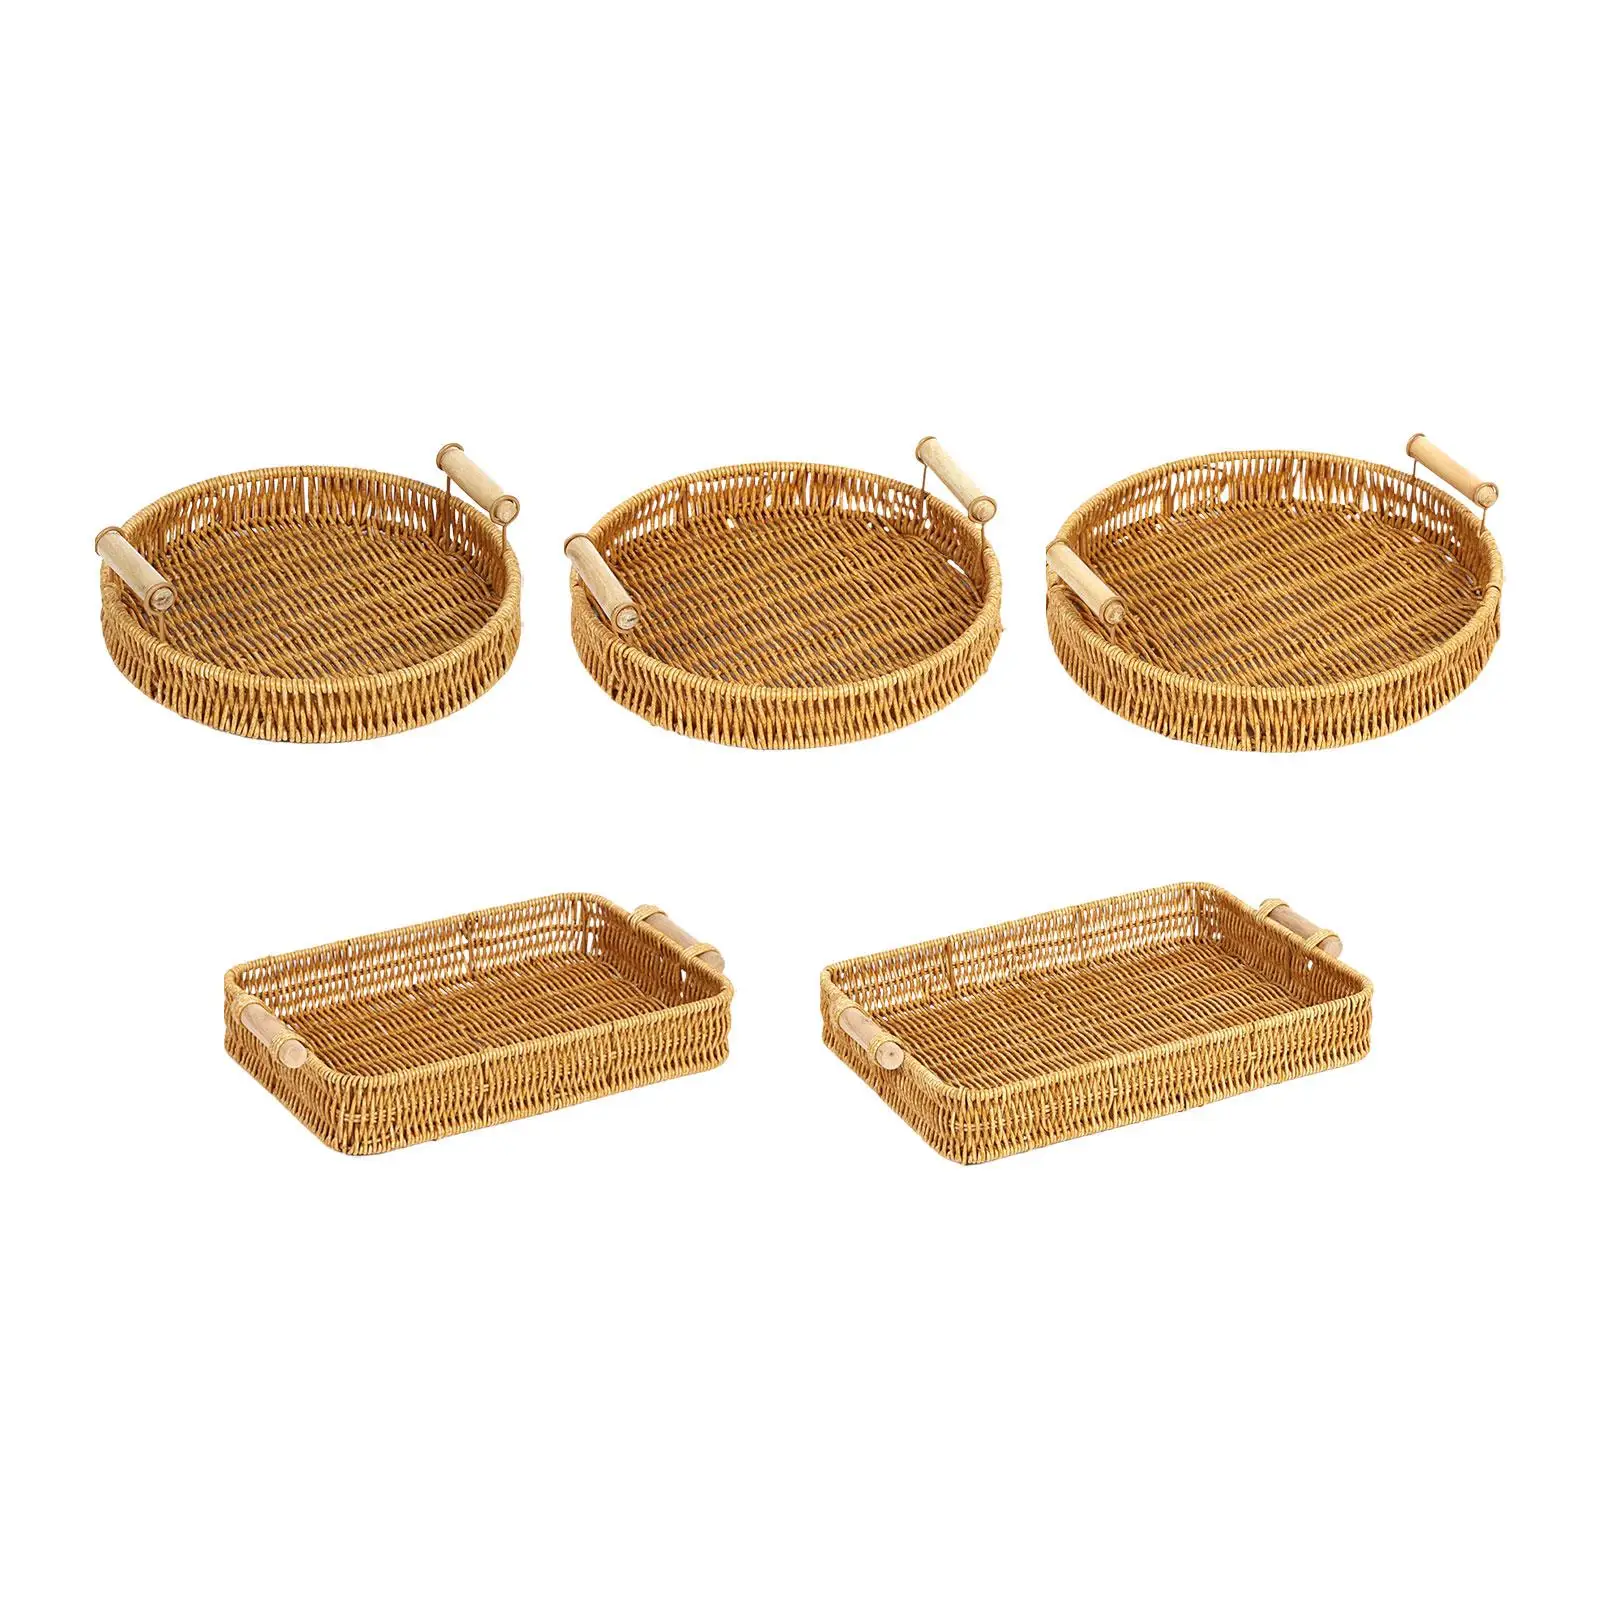 Woven Kitchen Storage Baskets Food Storage Bowls Desktop Fruit Bowl Food Organizer Tray for Holiday Outdoor Picnic Party Bedroom